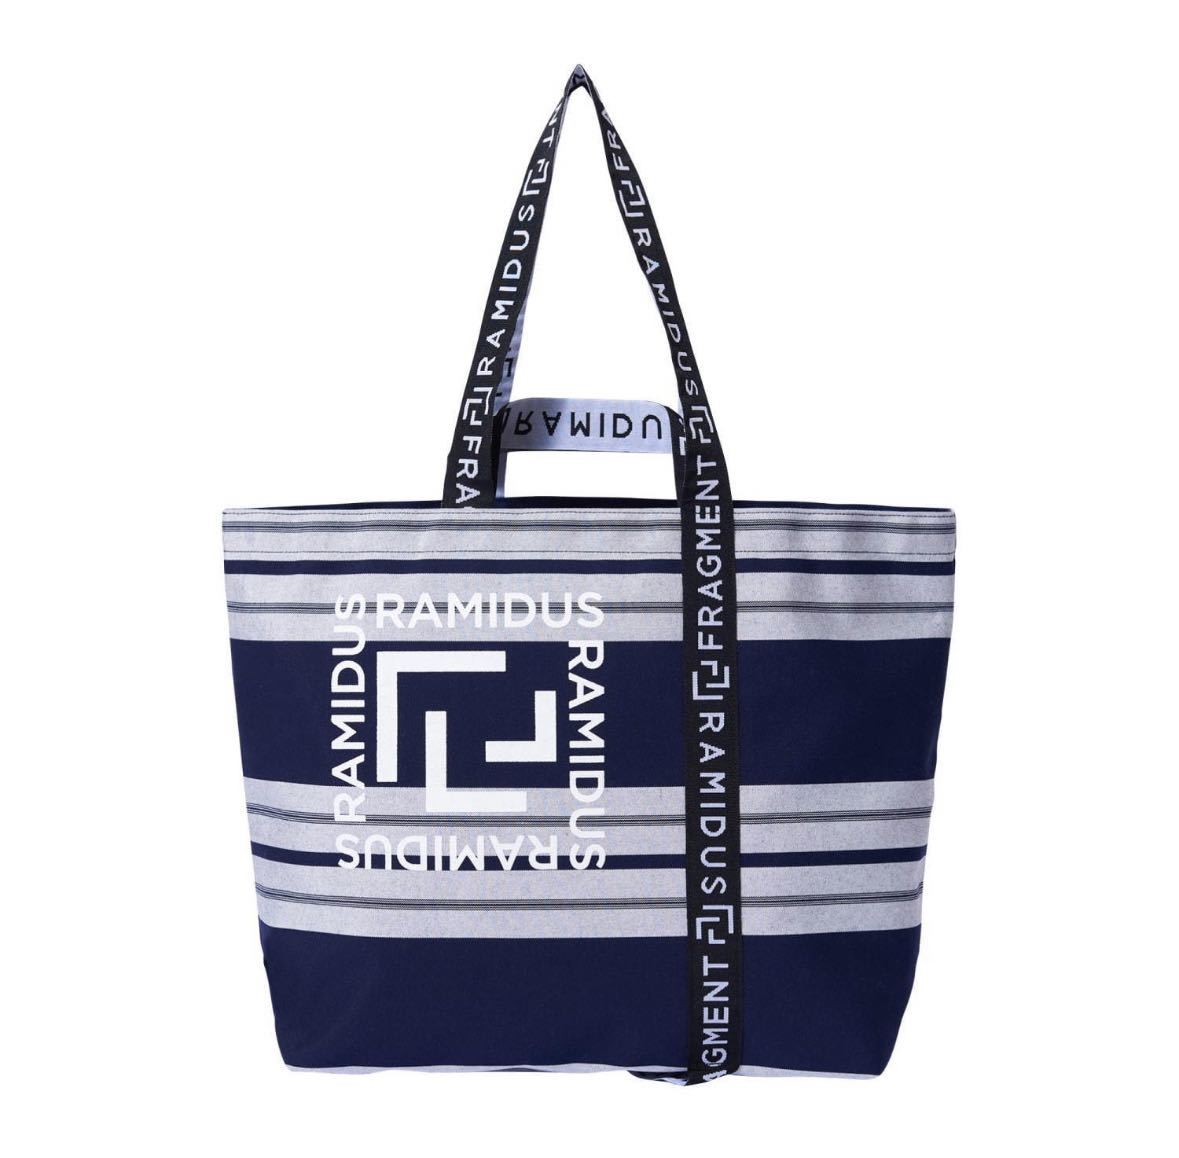 FRAGMENT RAMIDUS SEQUEL トートバッグ XL TOTE BAG フラグメント 